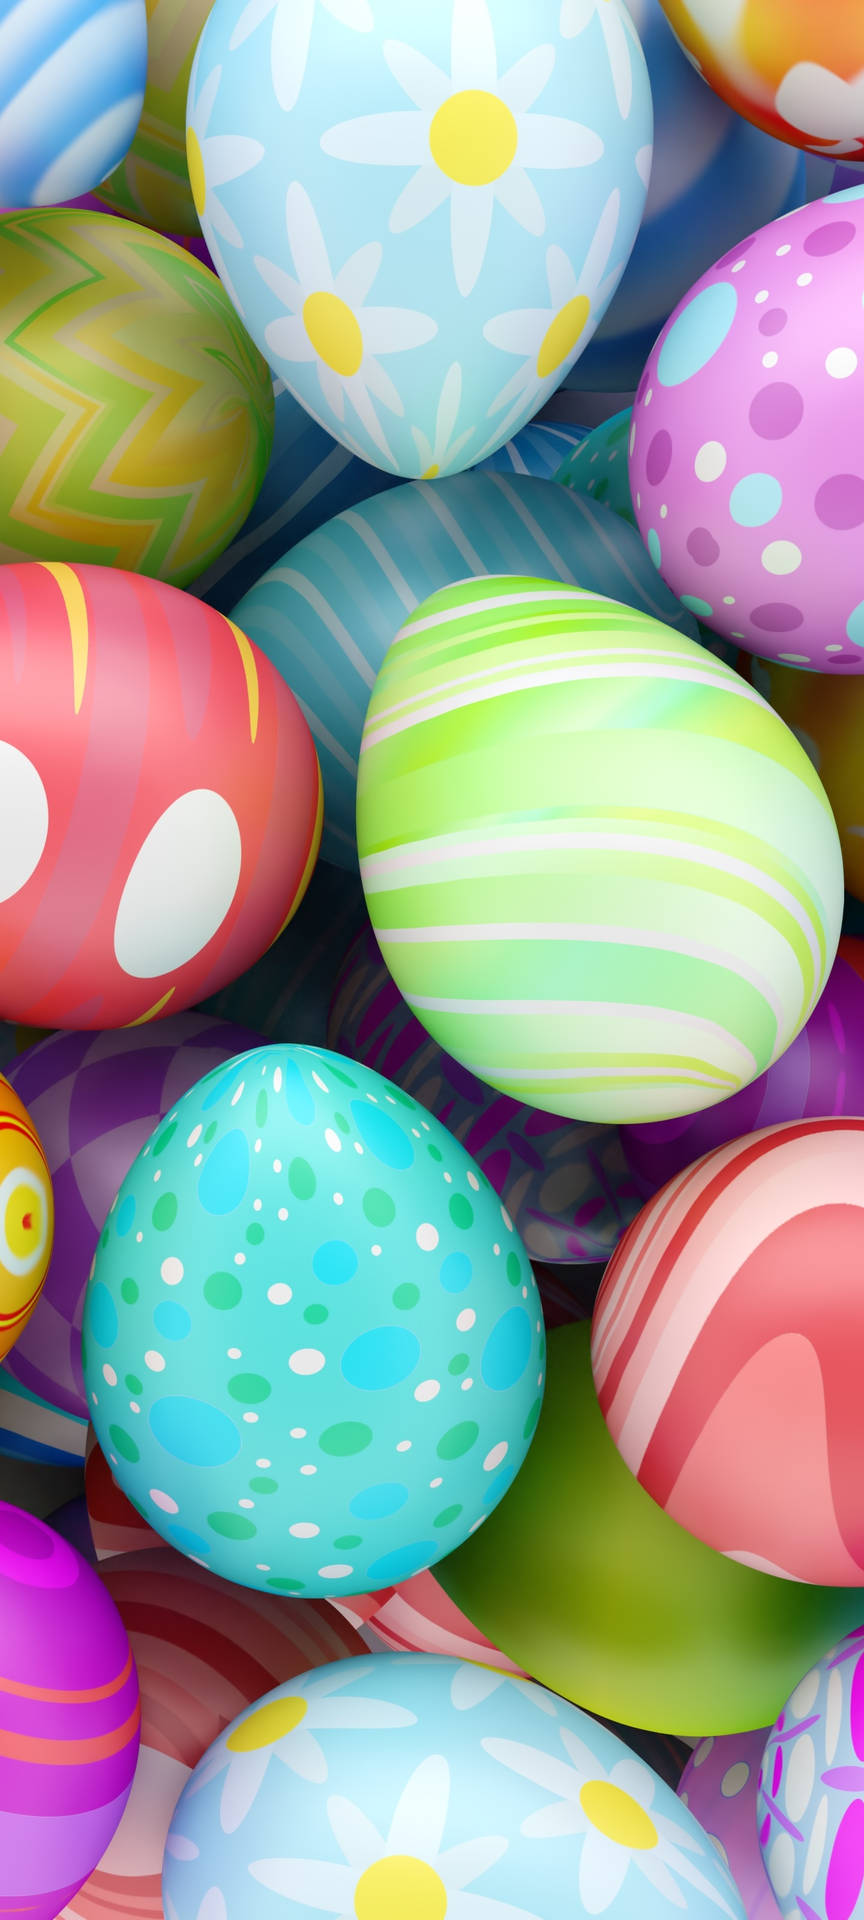 Celebrate Easter with a new smartphone Wallpaper